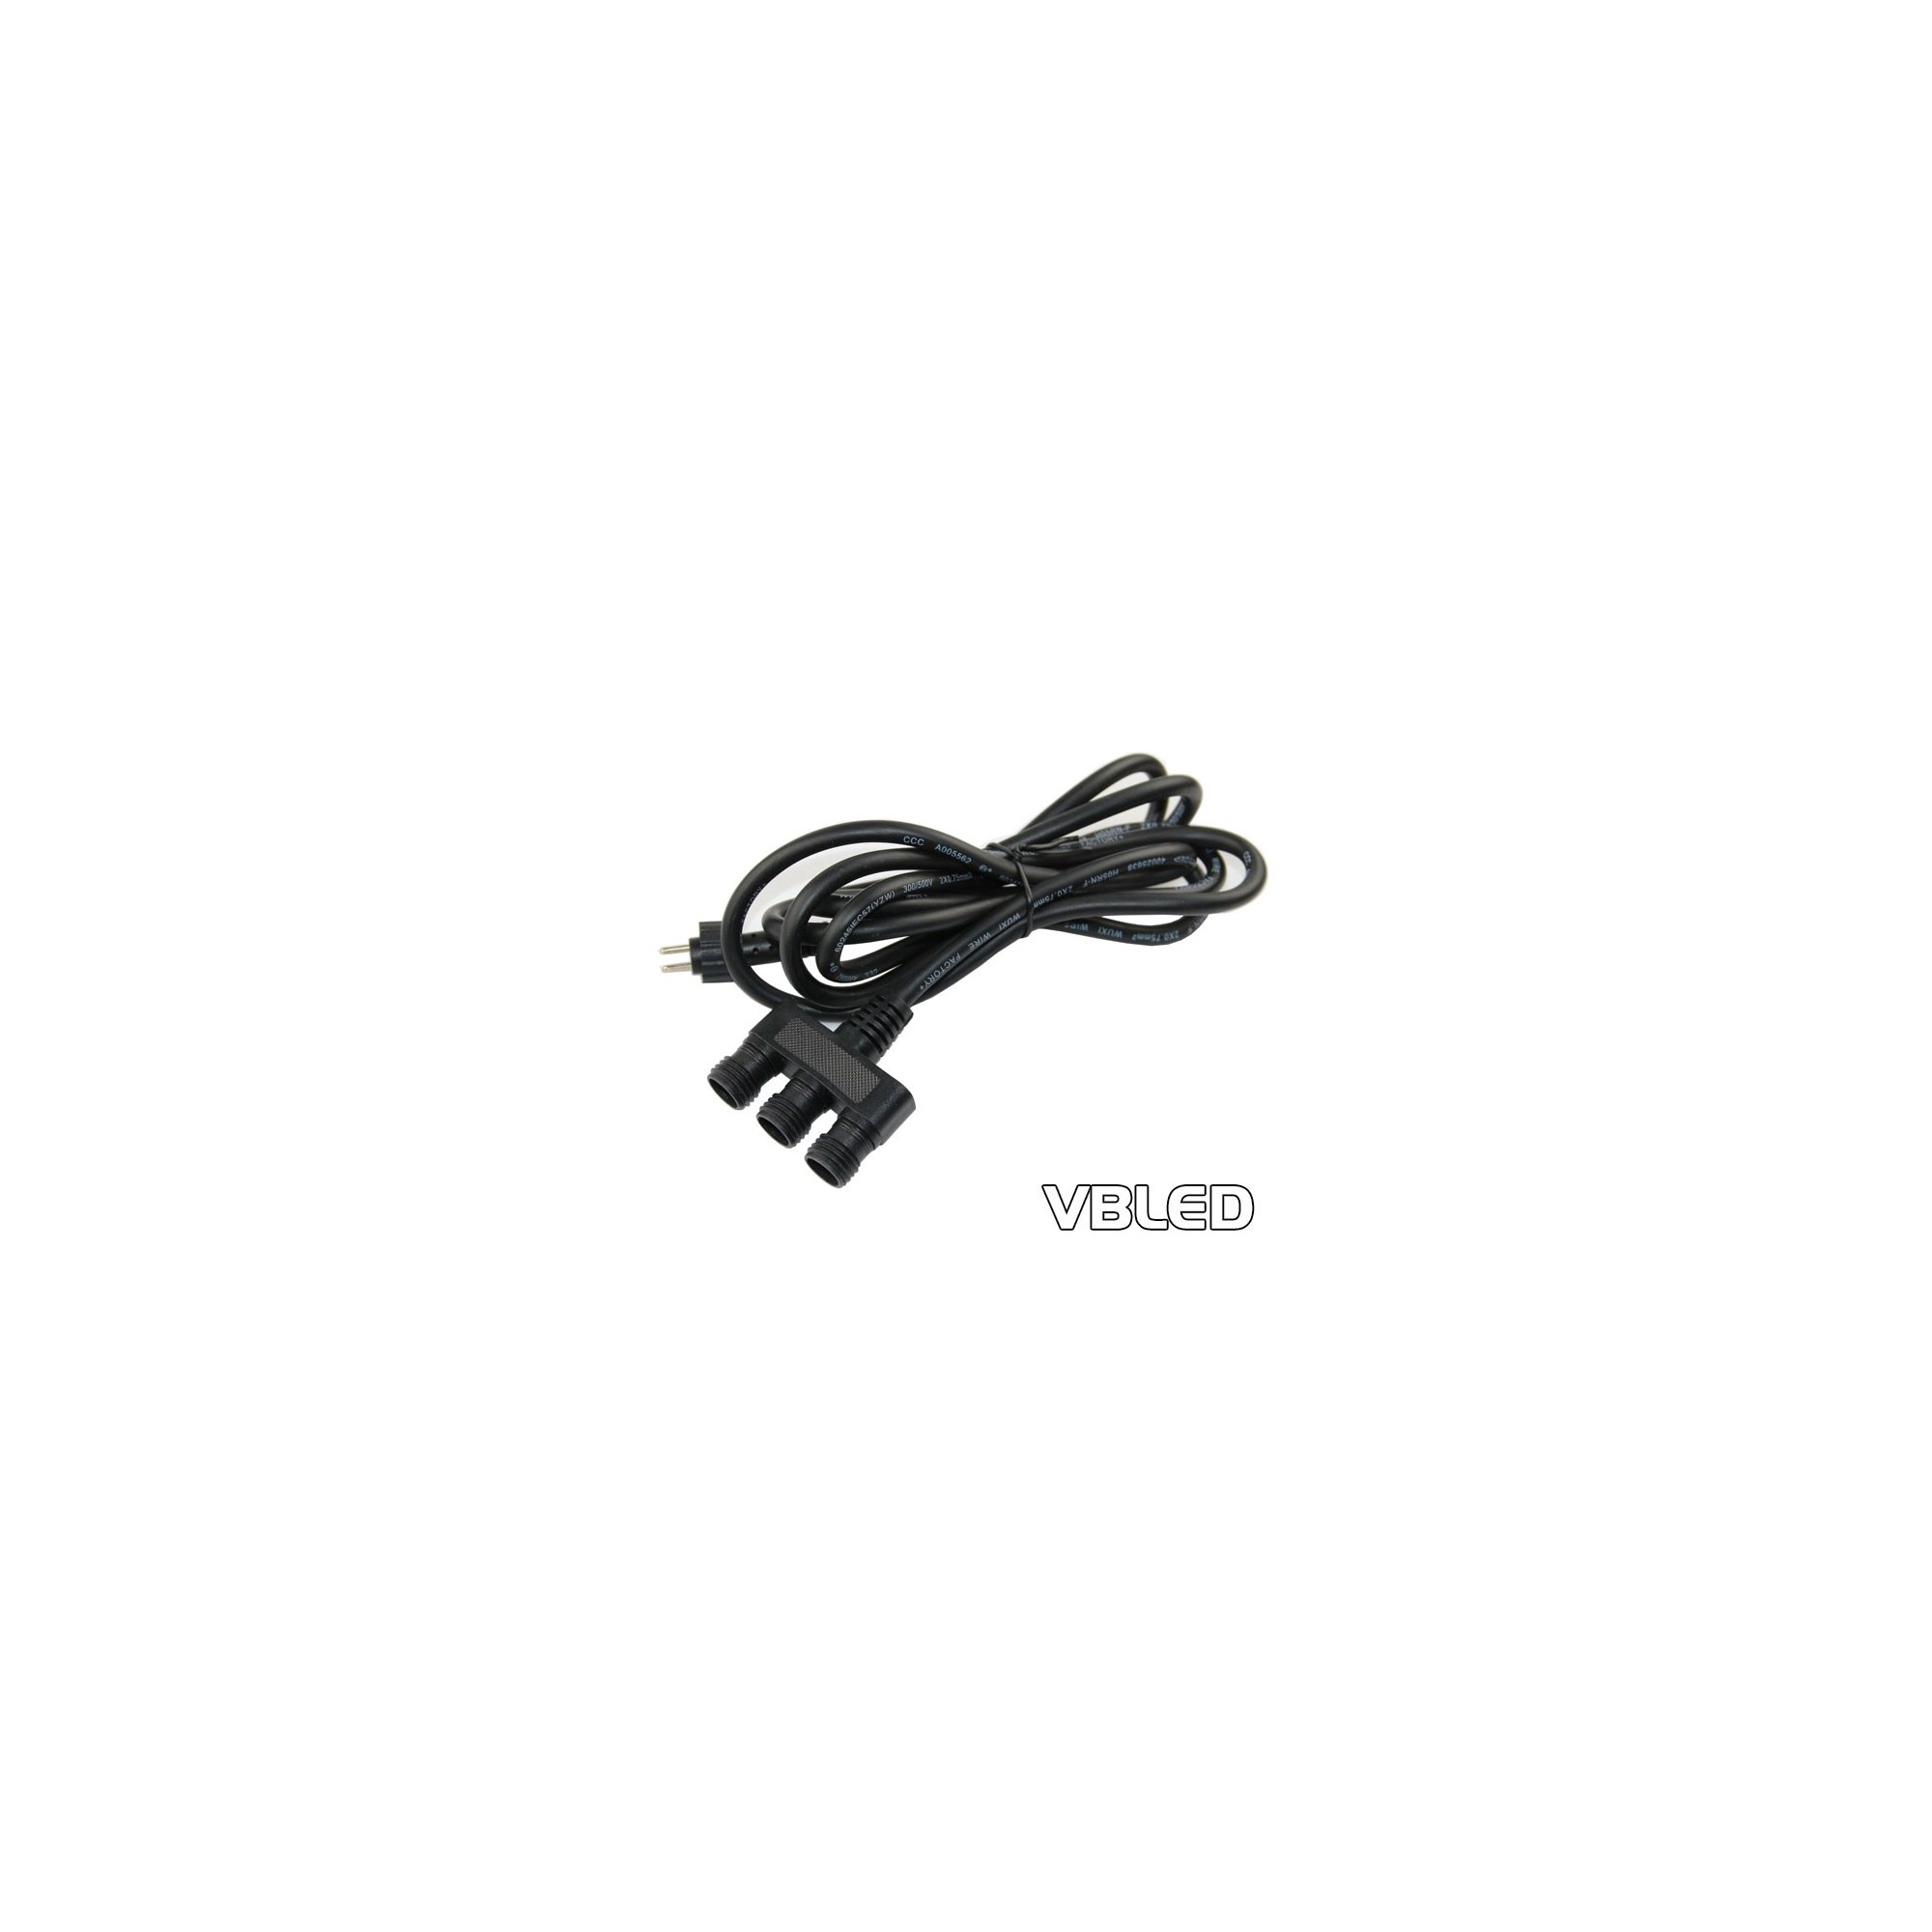 Gartus 3-way distribution cable 12V for outdoor use